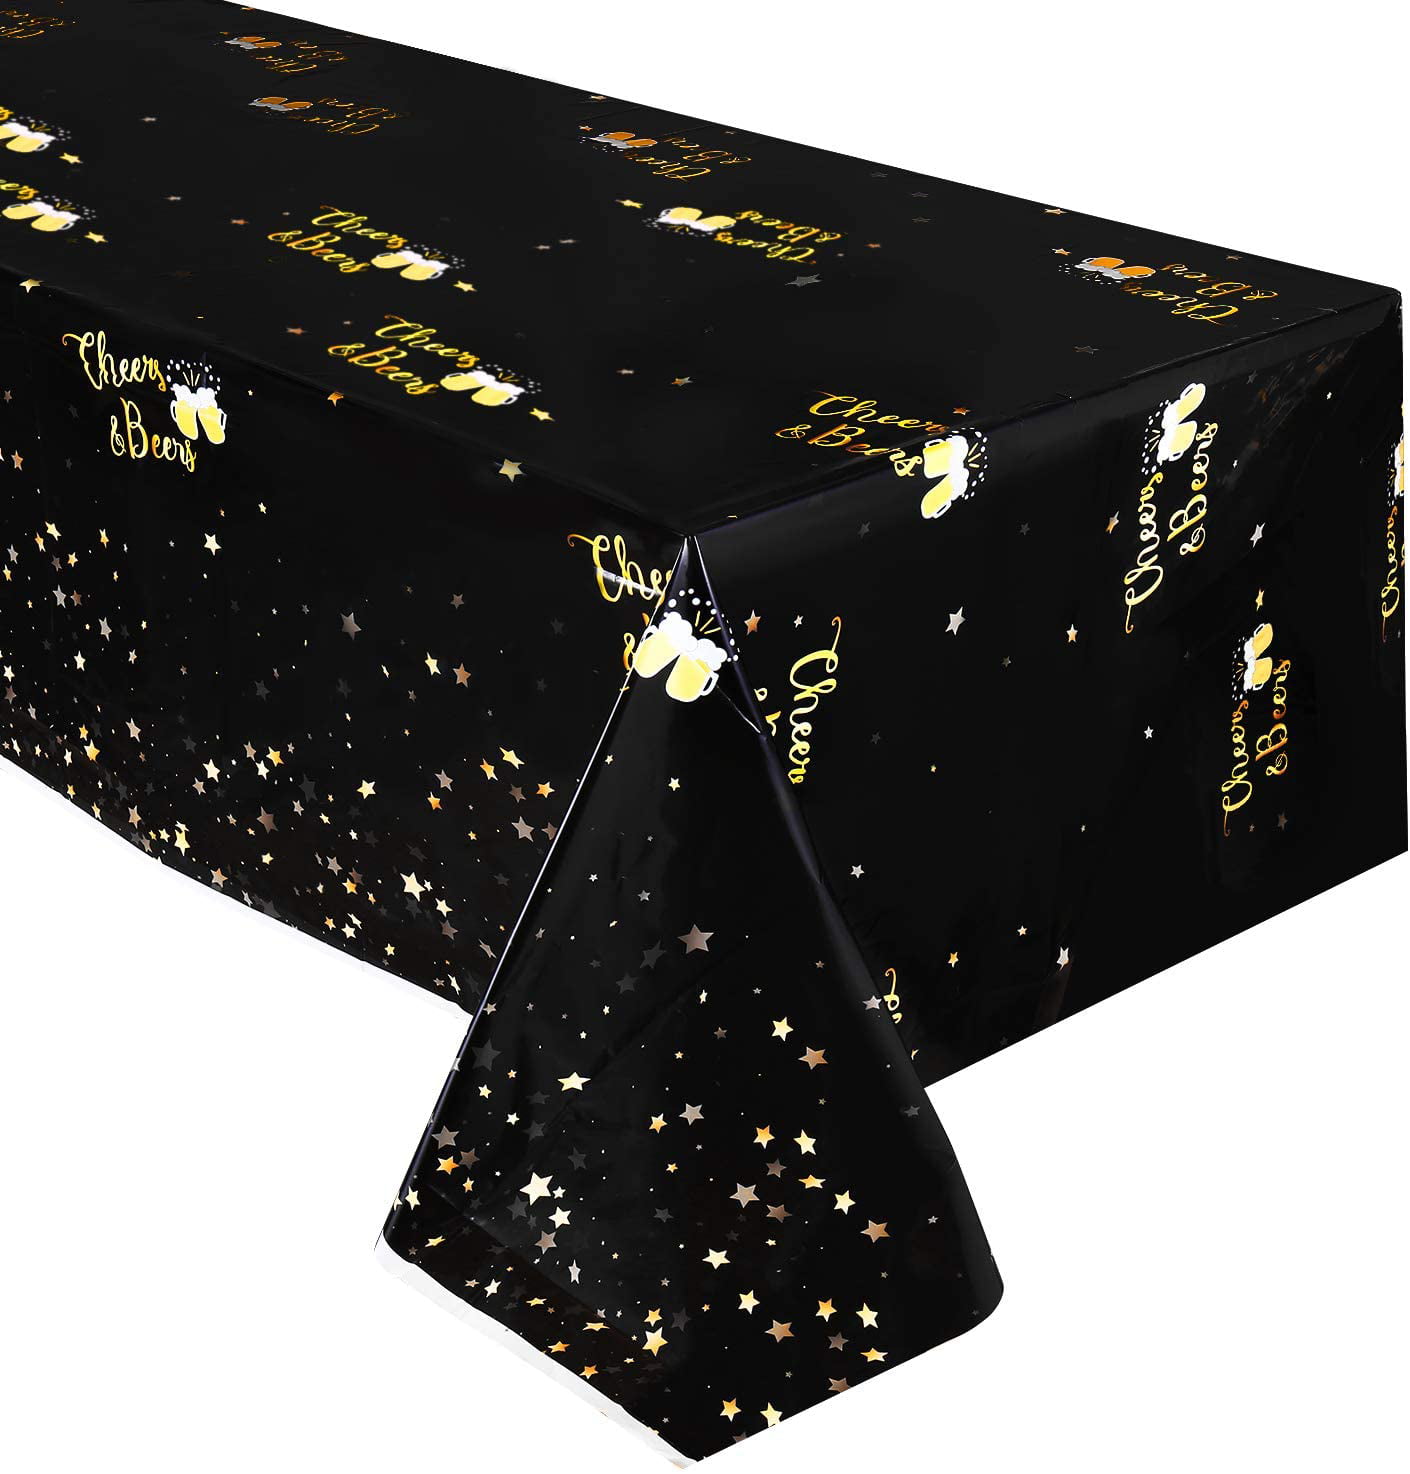 Black and Gold Tablecloth Disposable Plastic Table